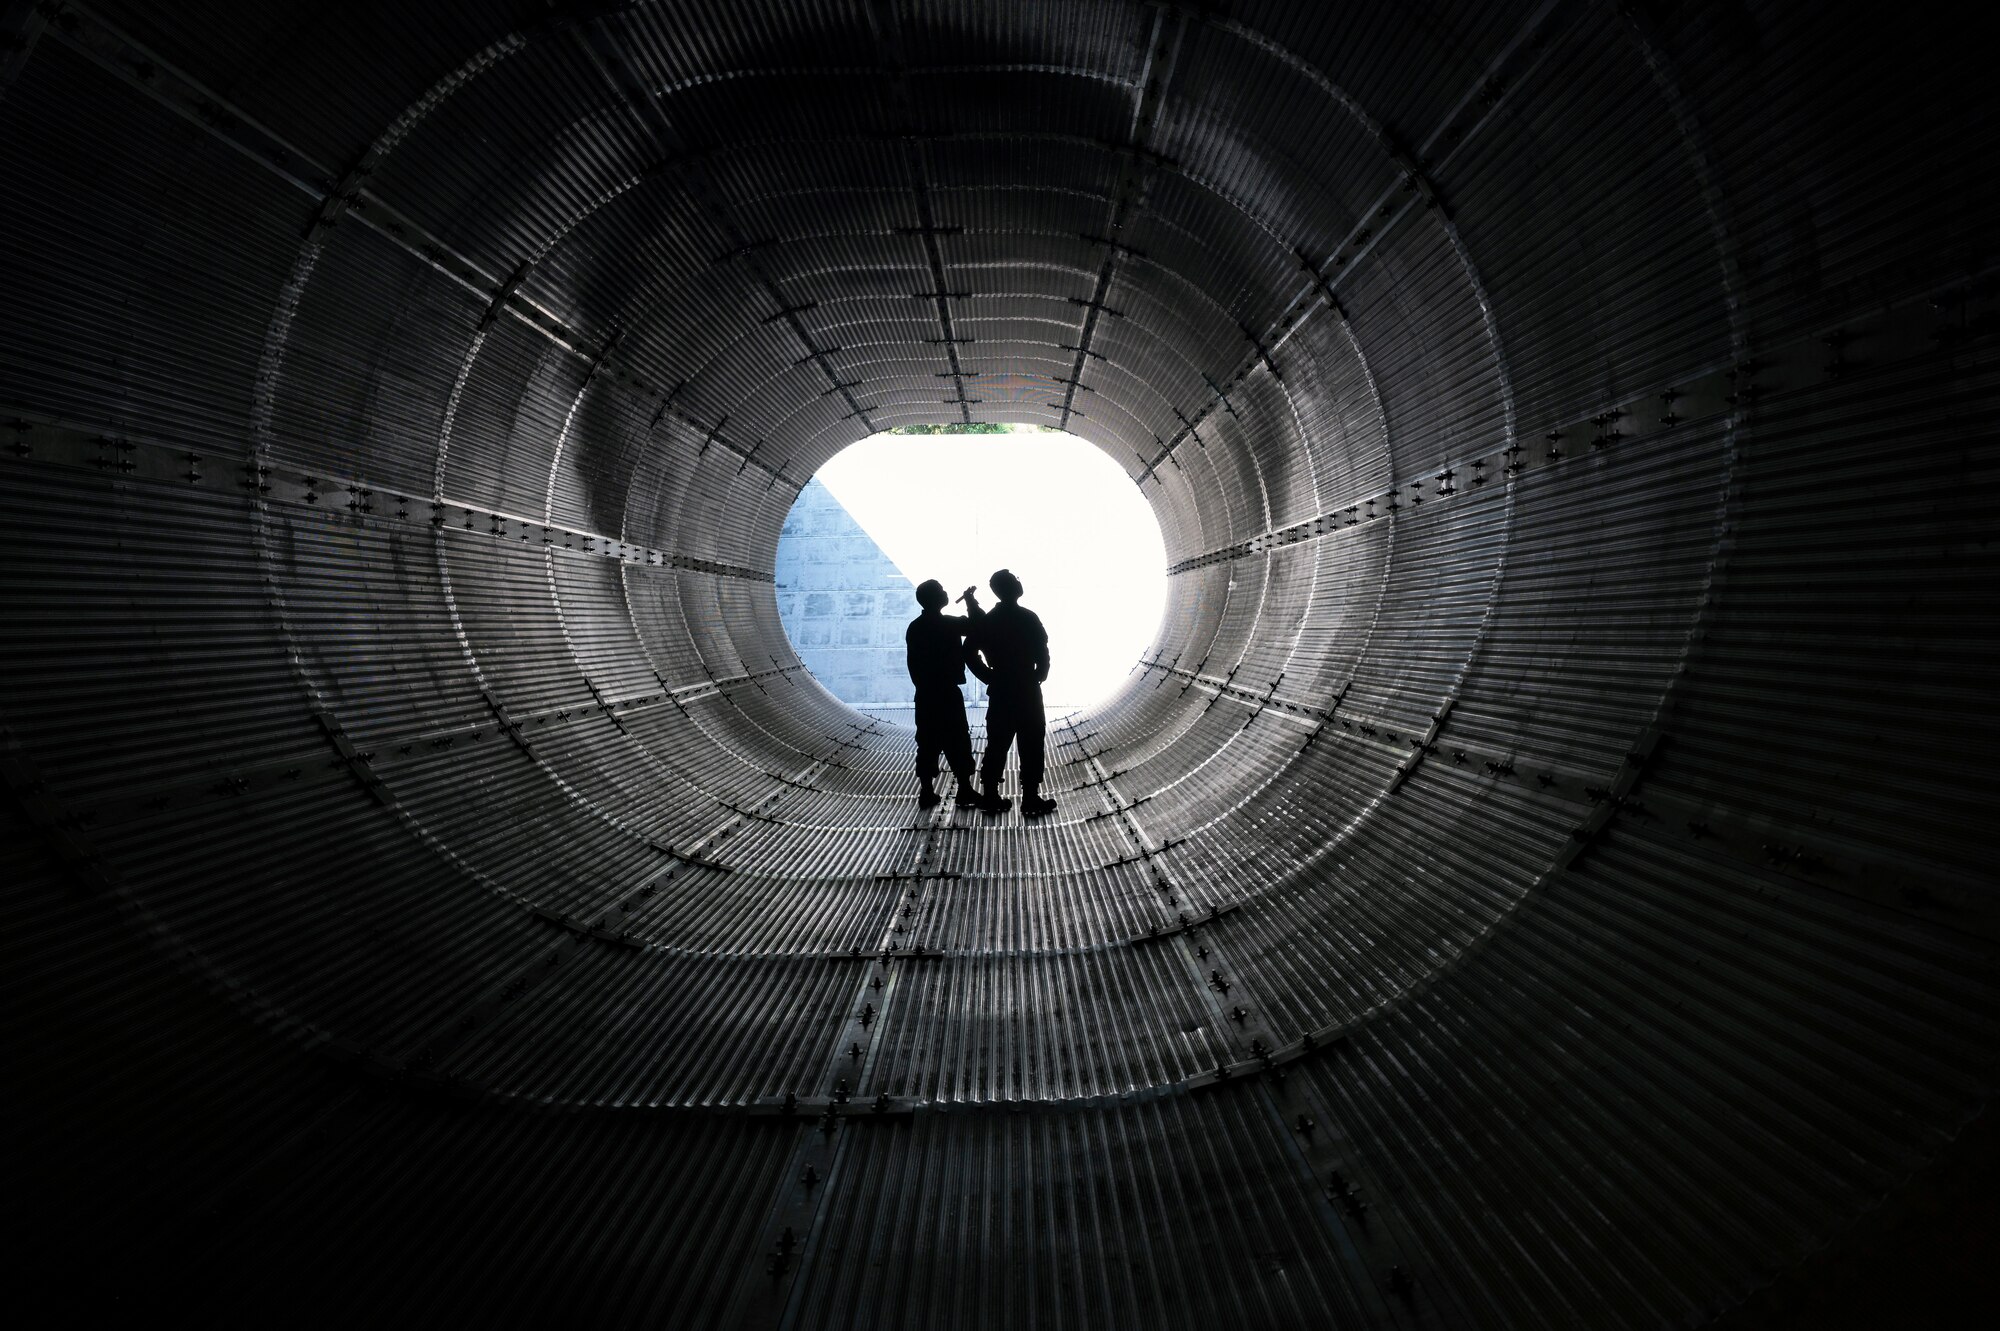 Airmen inspect the inside of an exhaust tube for damage after an engine run.